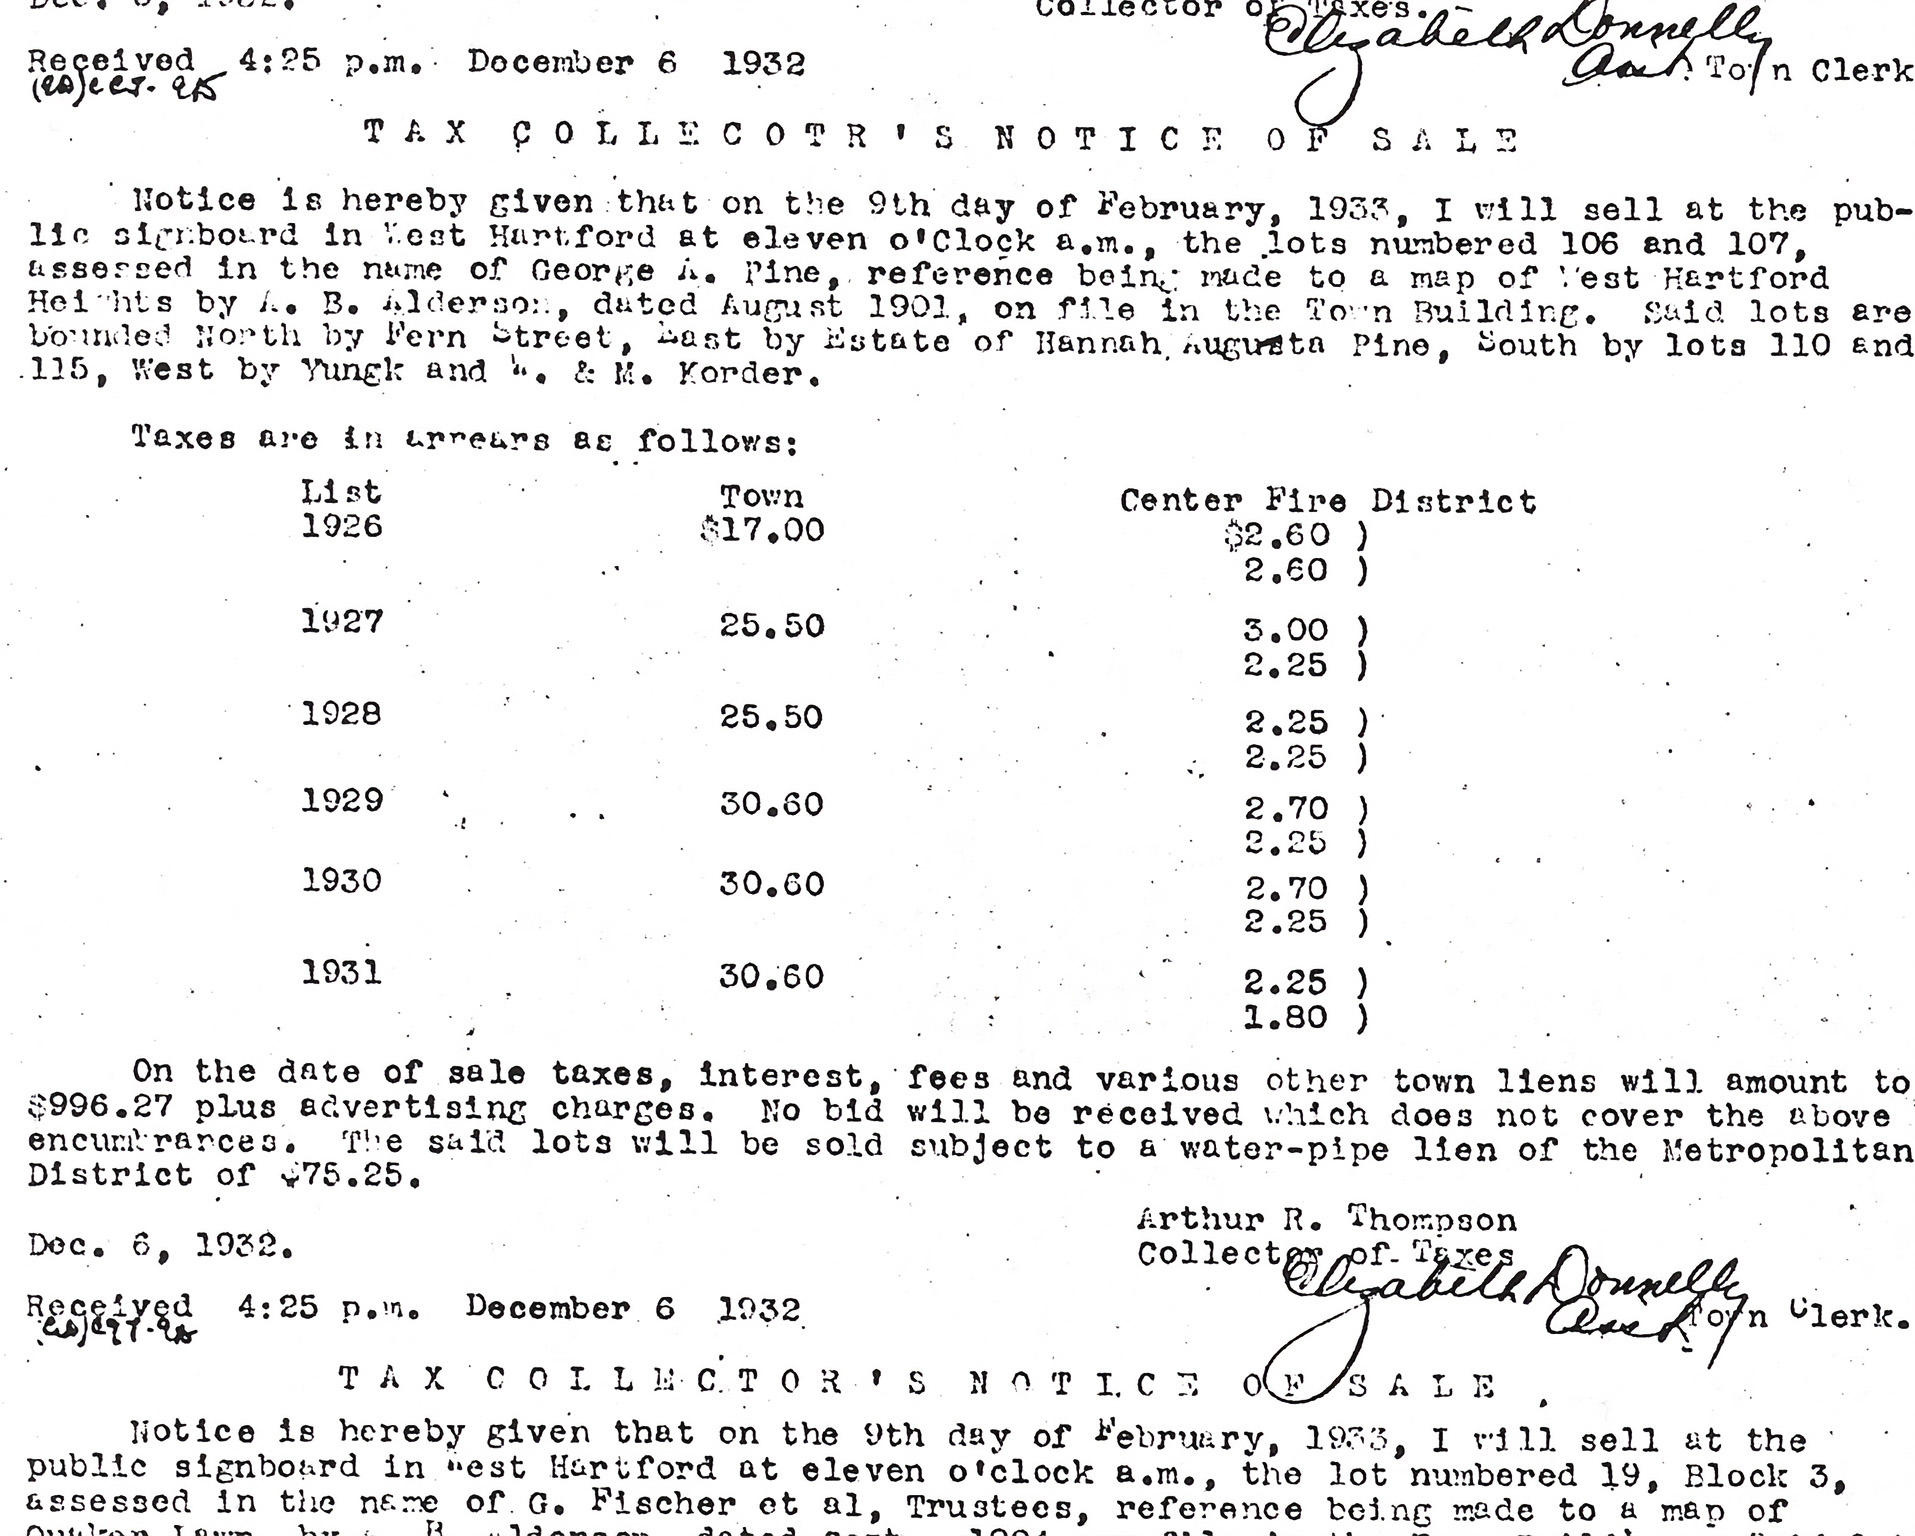 Tax Collector's Notice of Sale dated December 6, 1932 for George Pine's property.